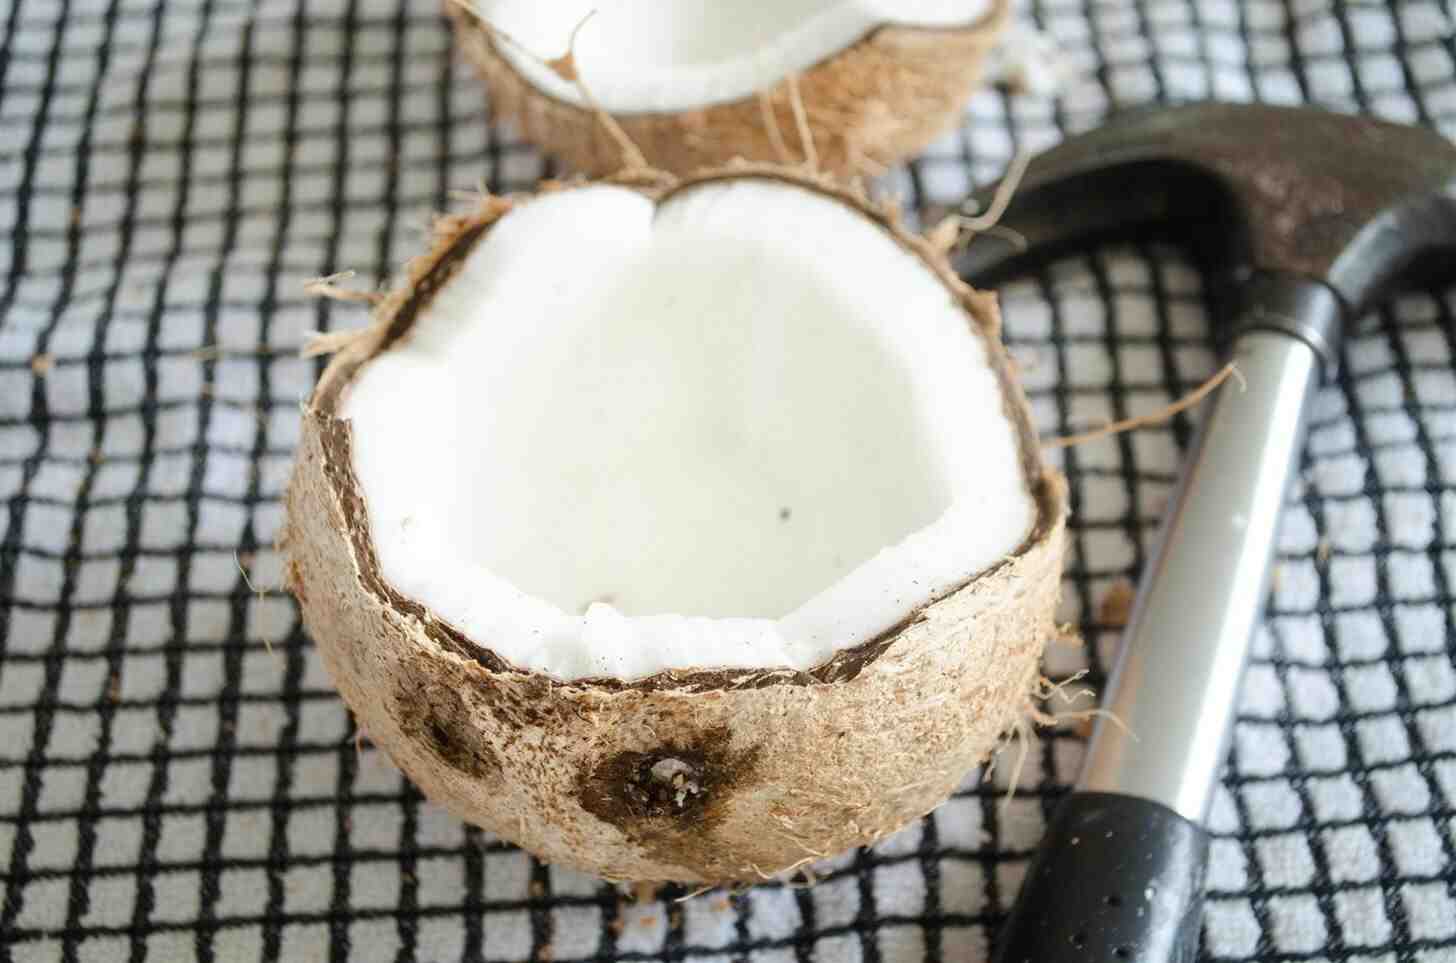 How do you break a coconut without losing water?